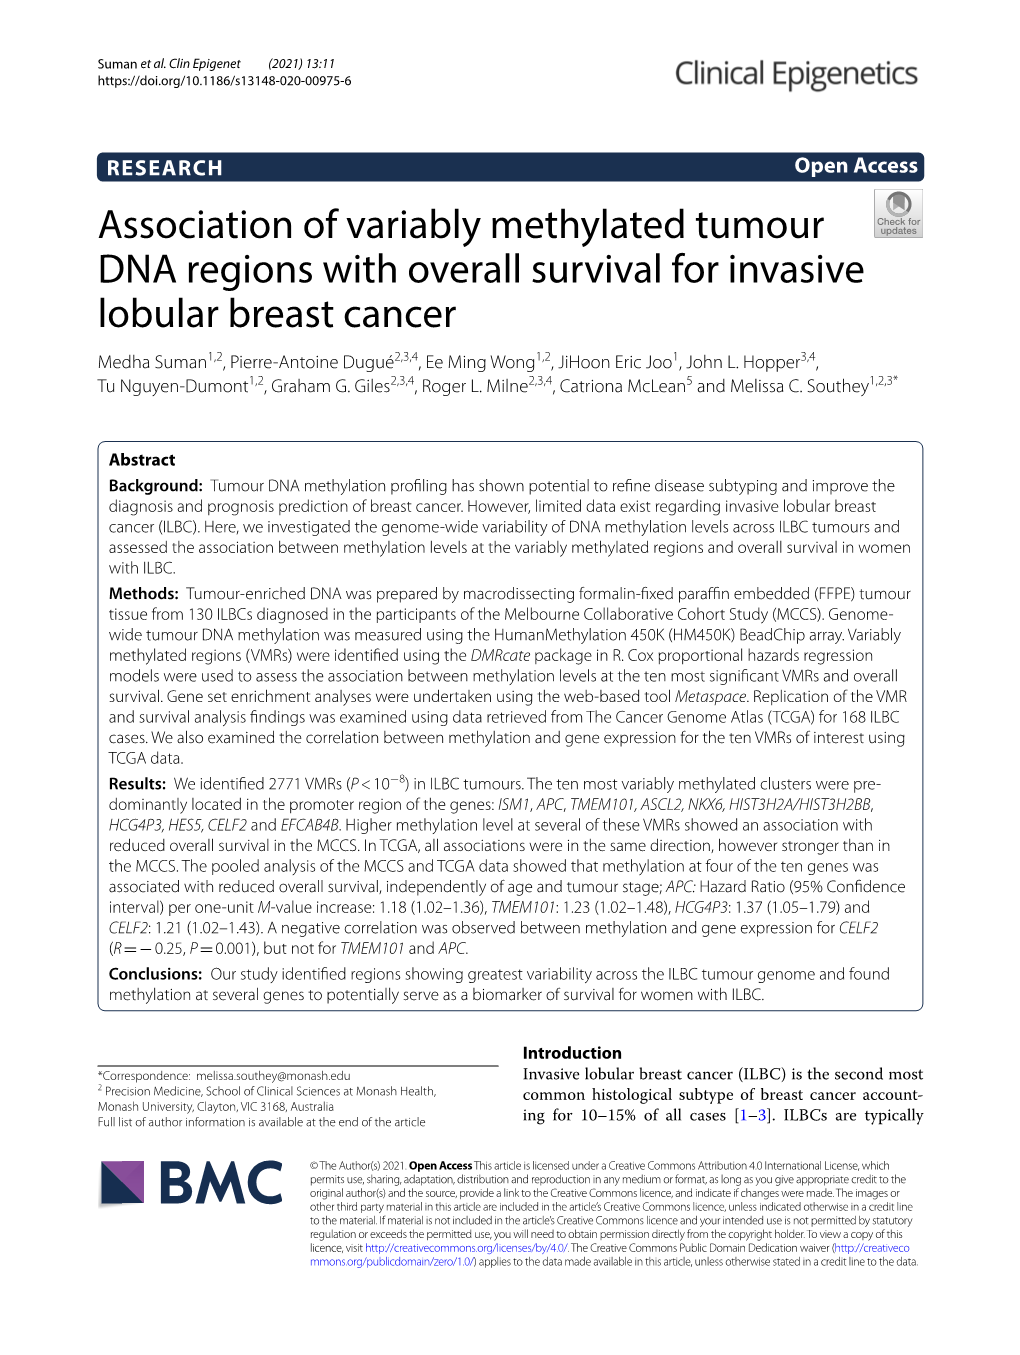 Association of Variably Methylated Tumour DNA Regions with Overall